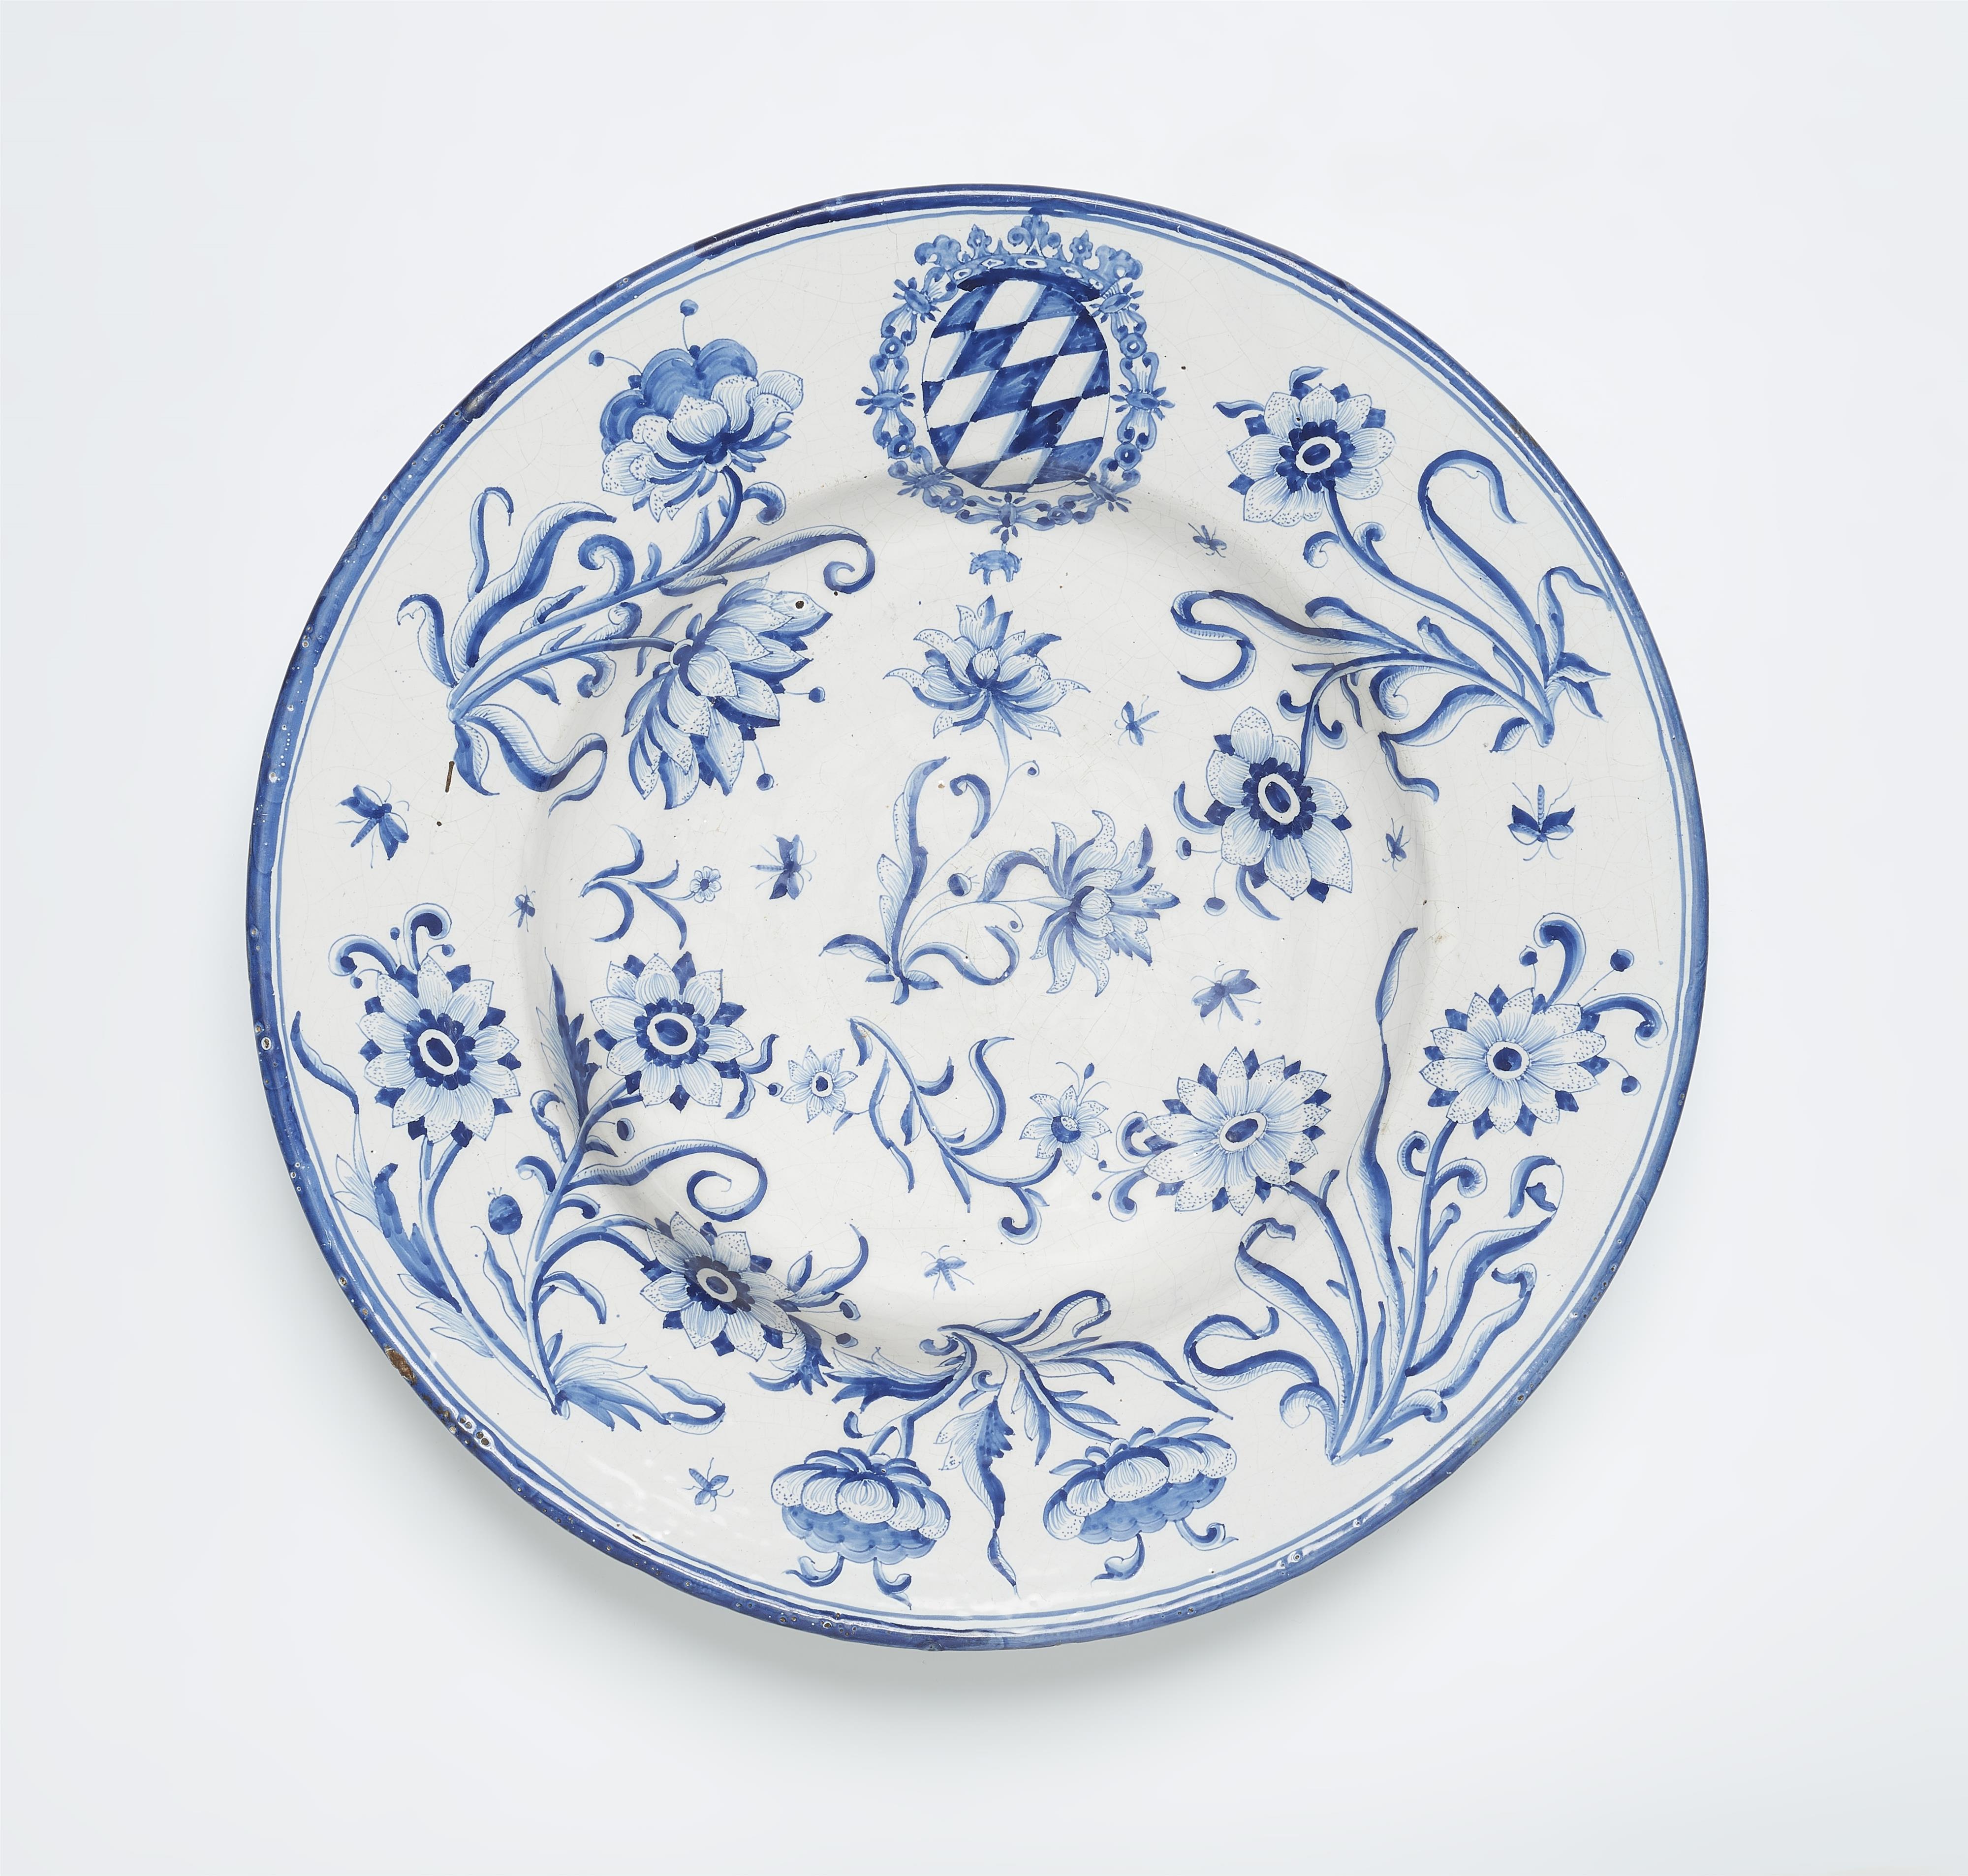 A Hanau faience dish with the coat of arms of a Bavarian prince elector - image-1